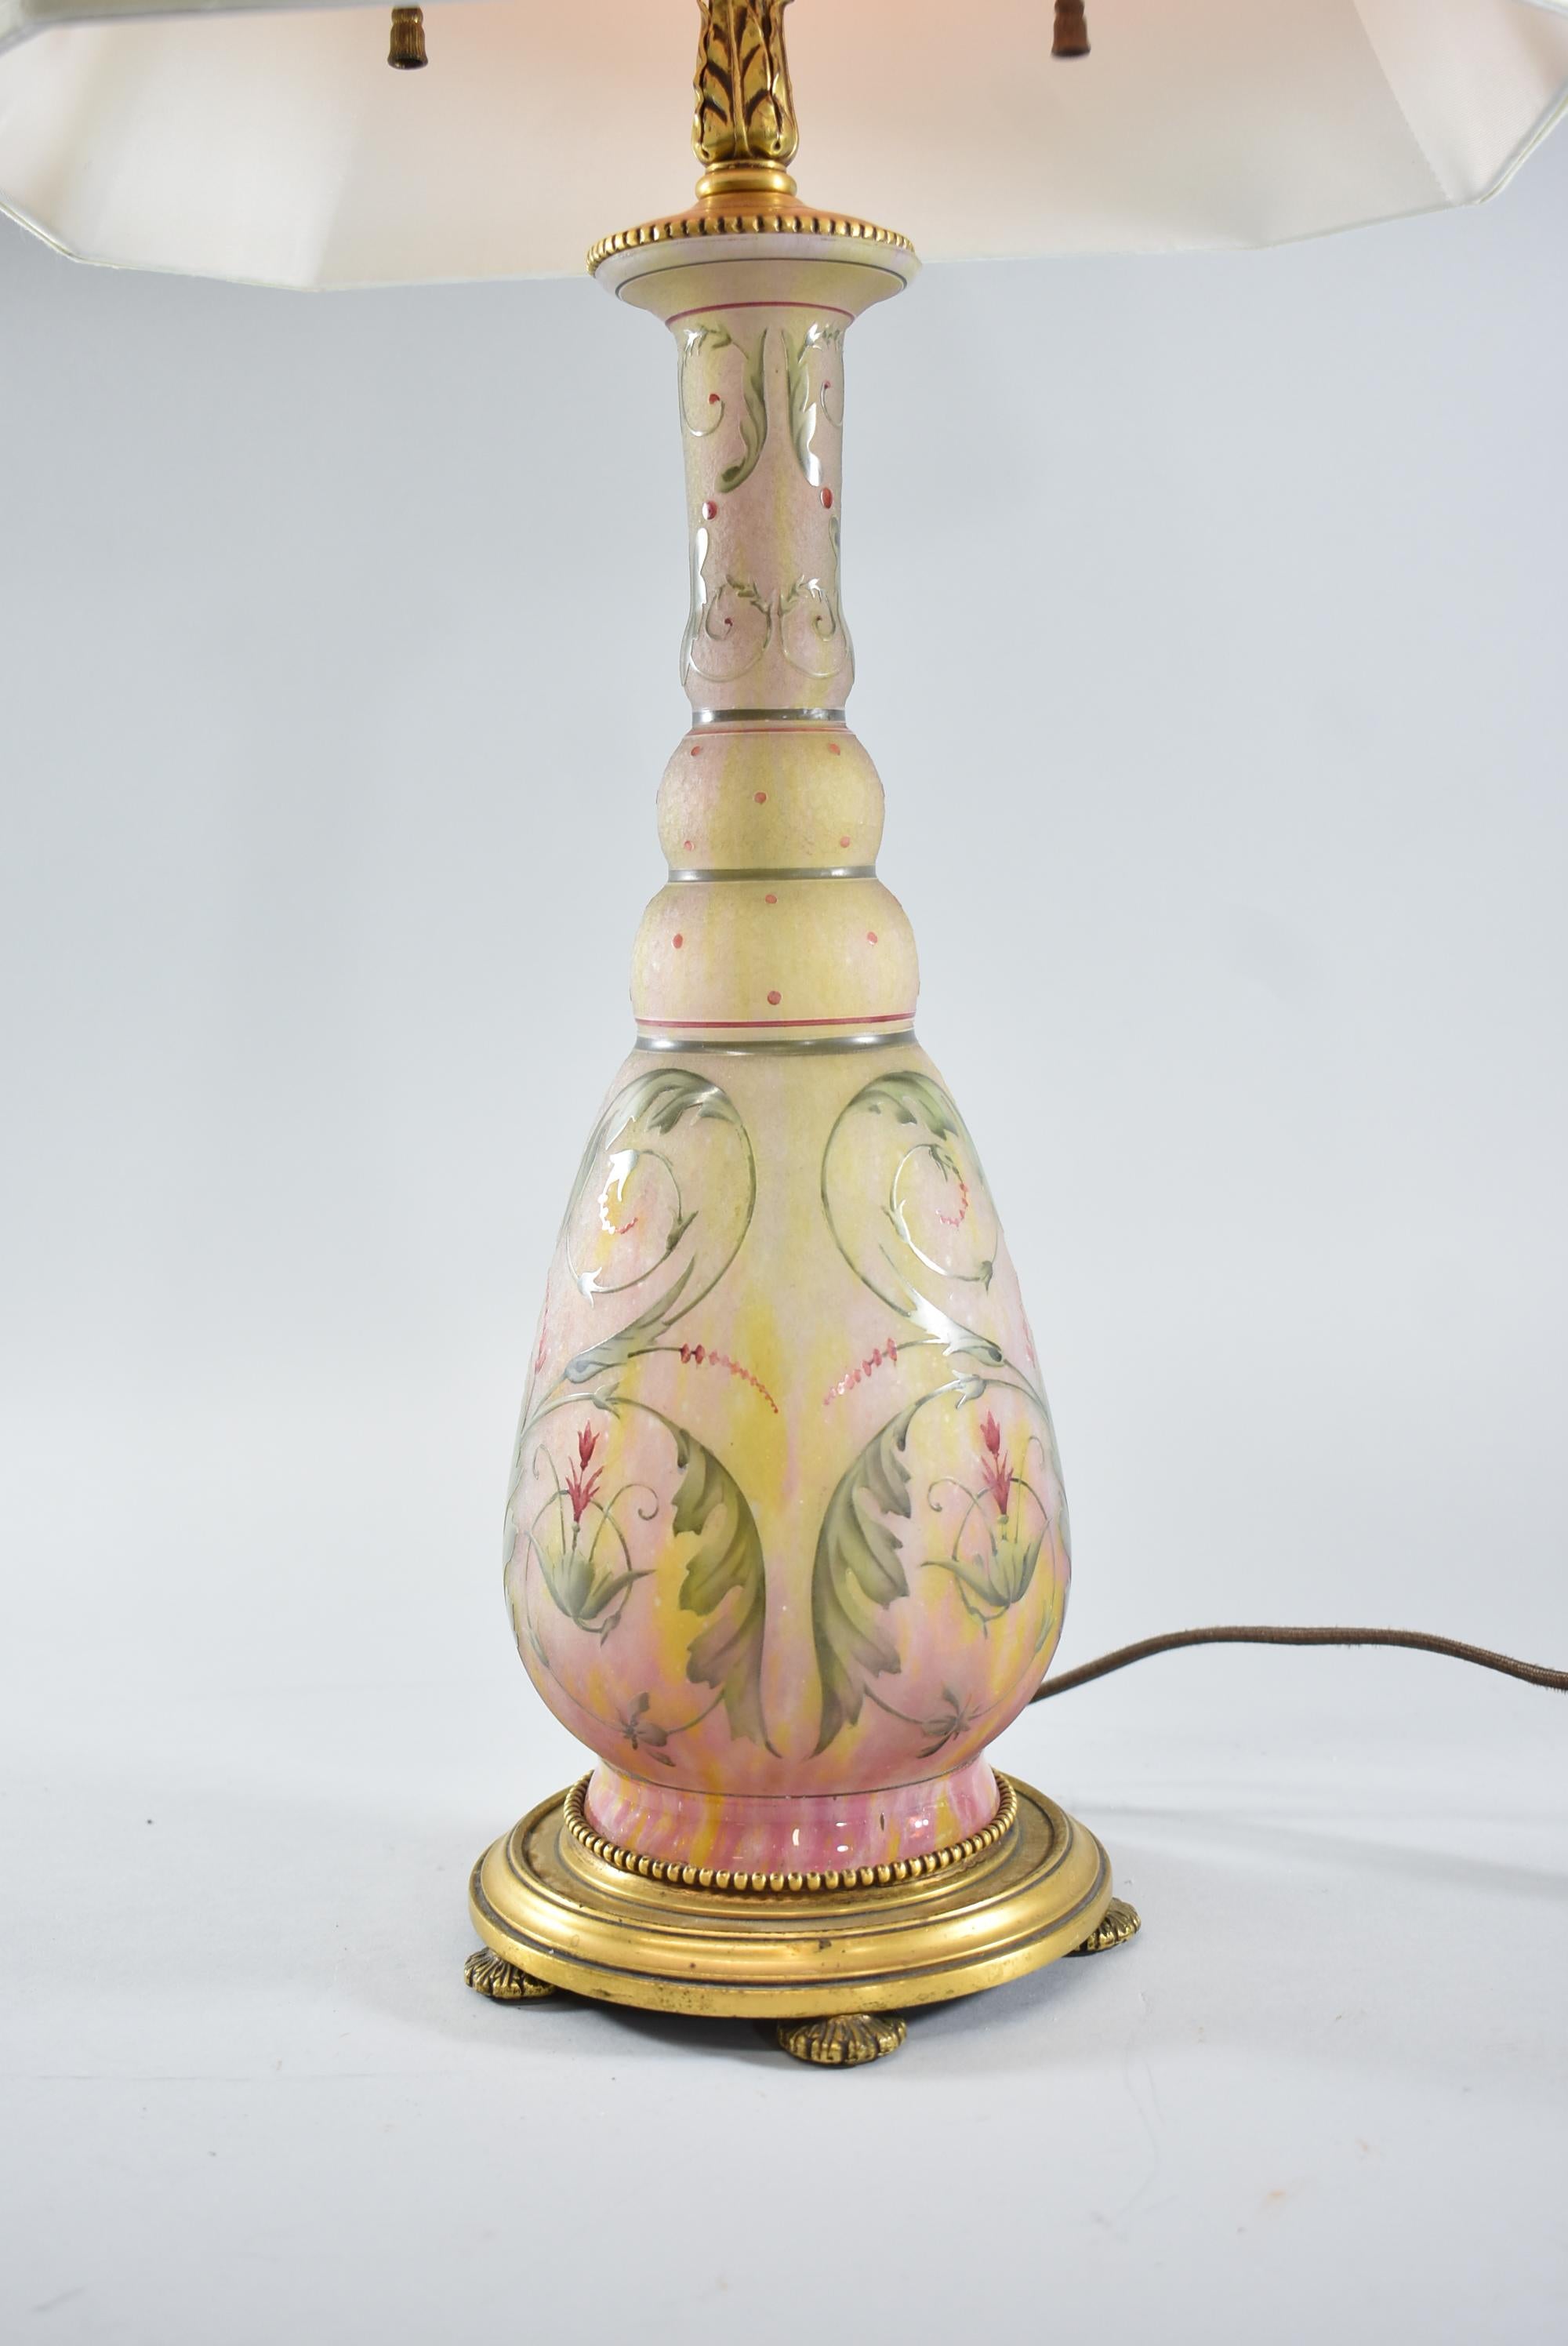 French Provincial Daum Nancy French Hand Decorated Acid Cut Art Glass Table Lamp Floral Designs